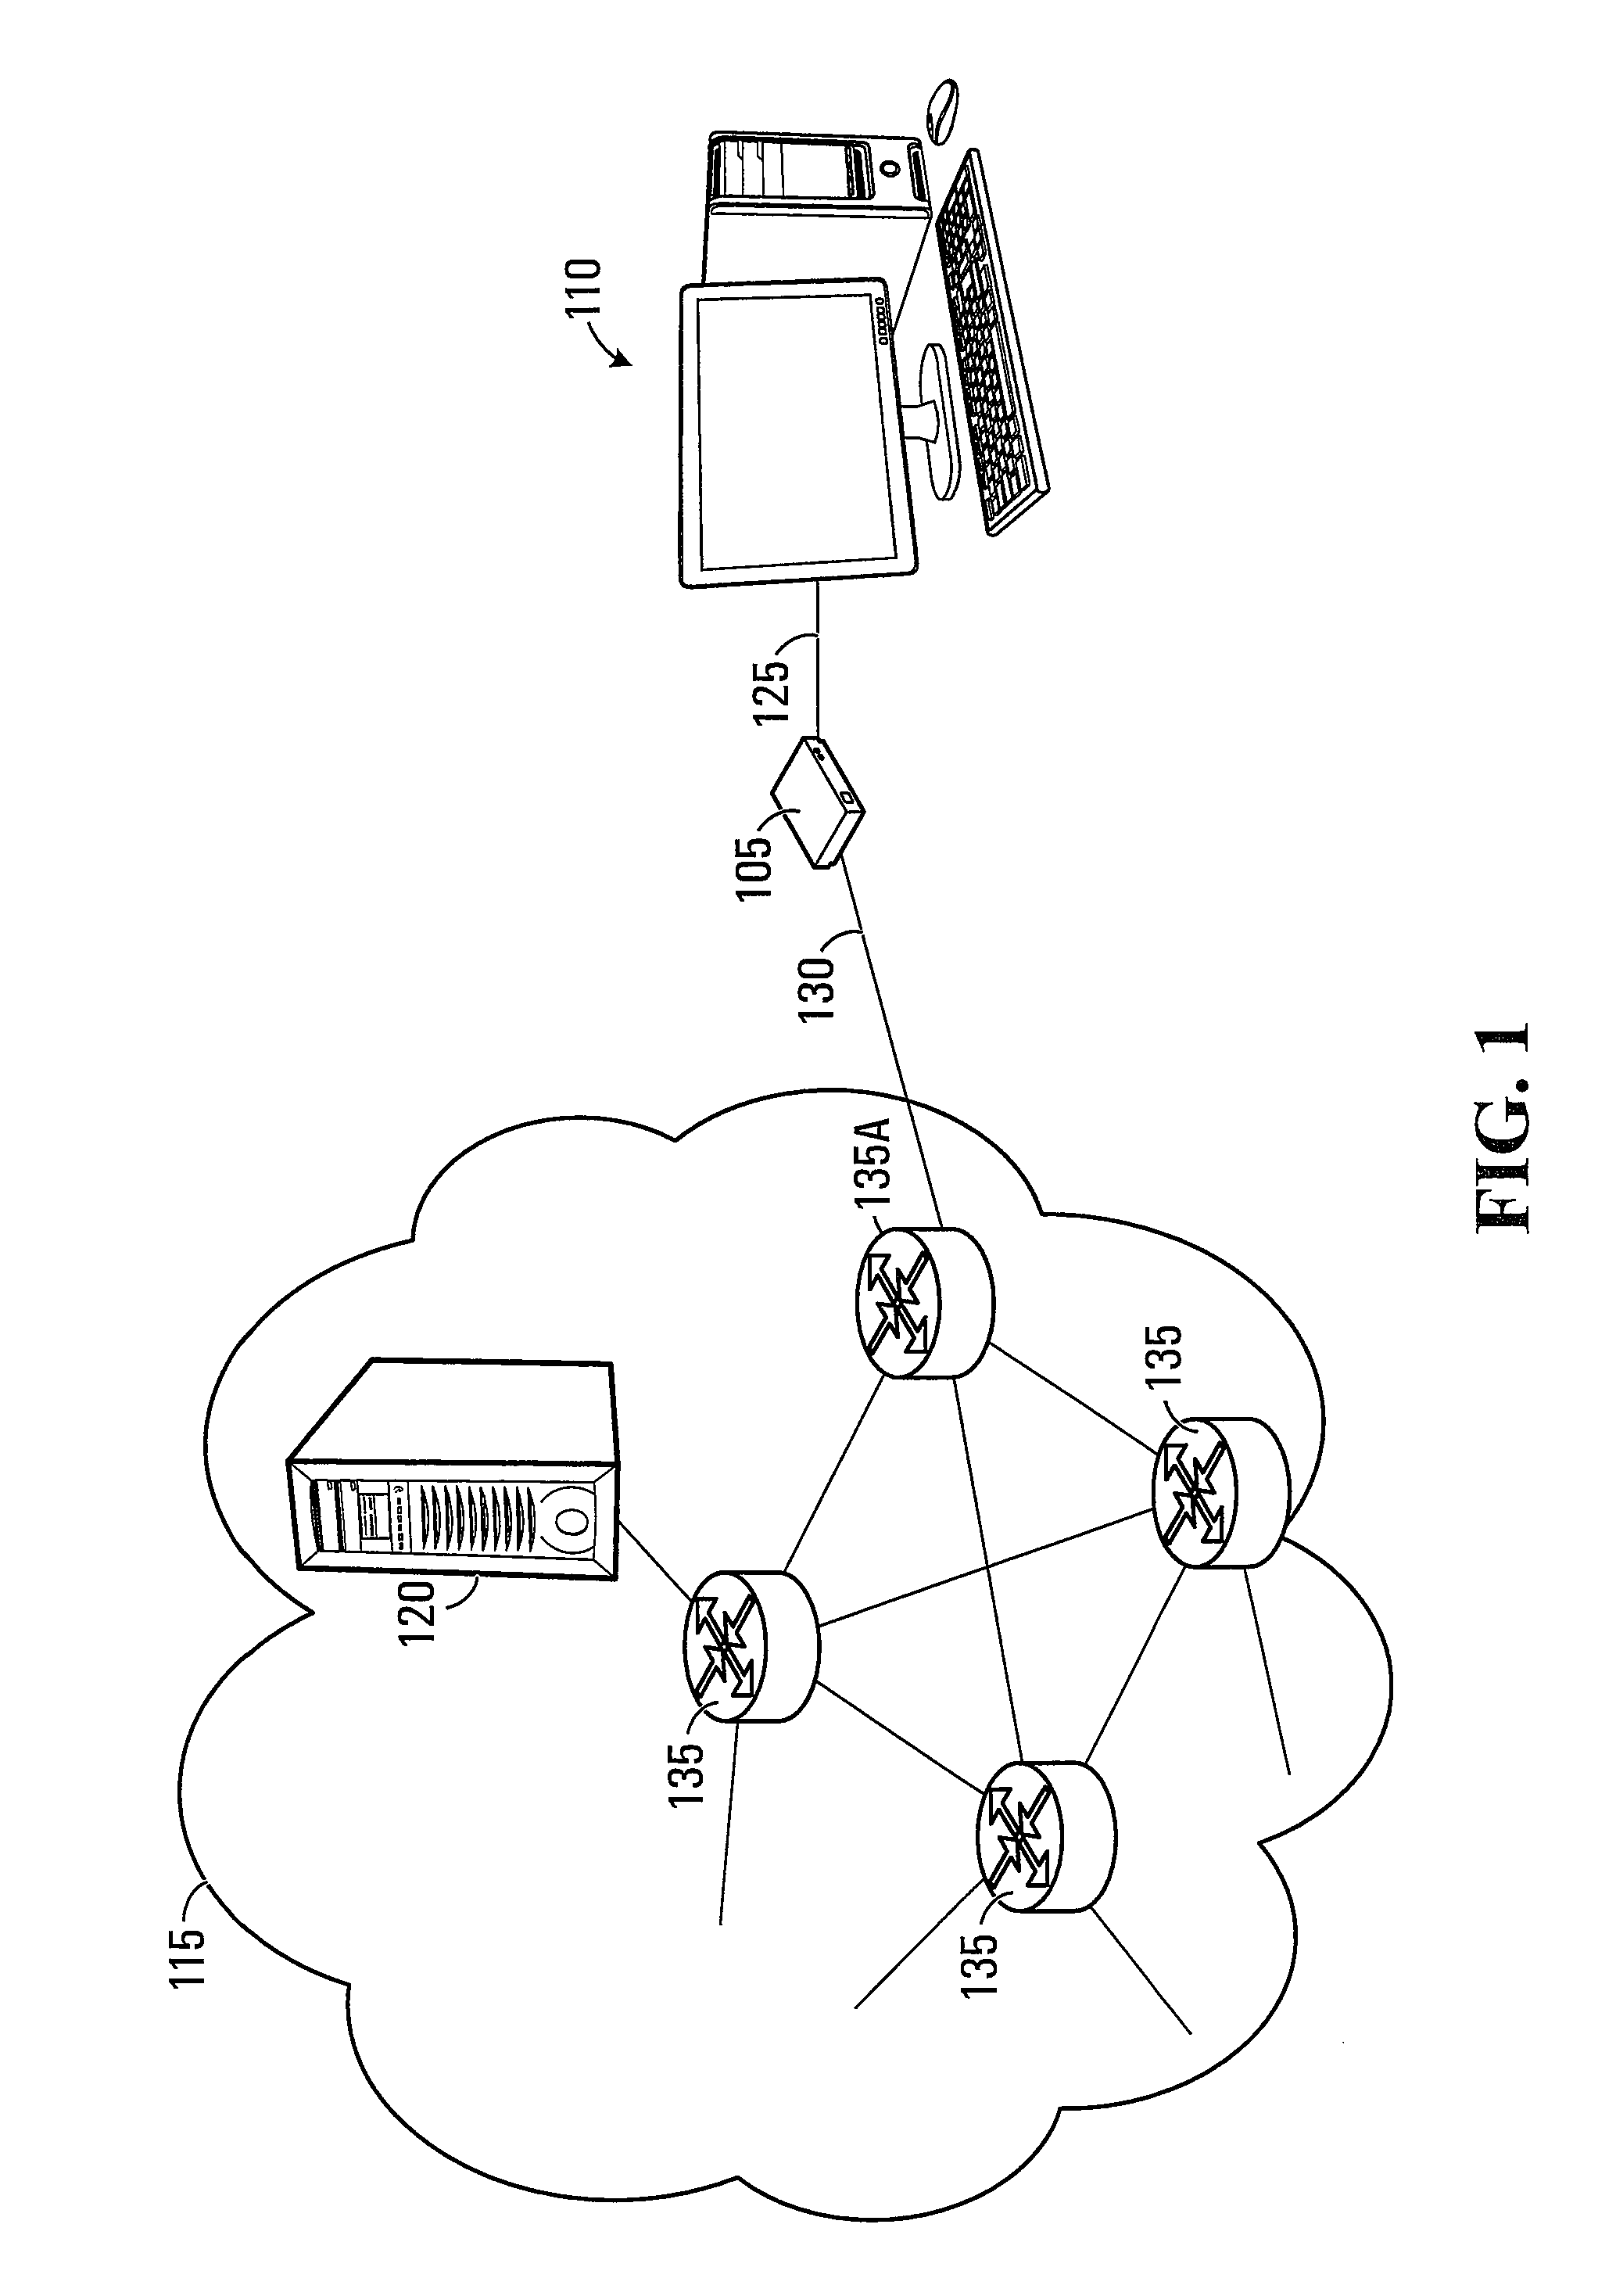 Service level selection method and system